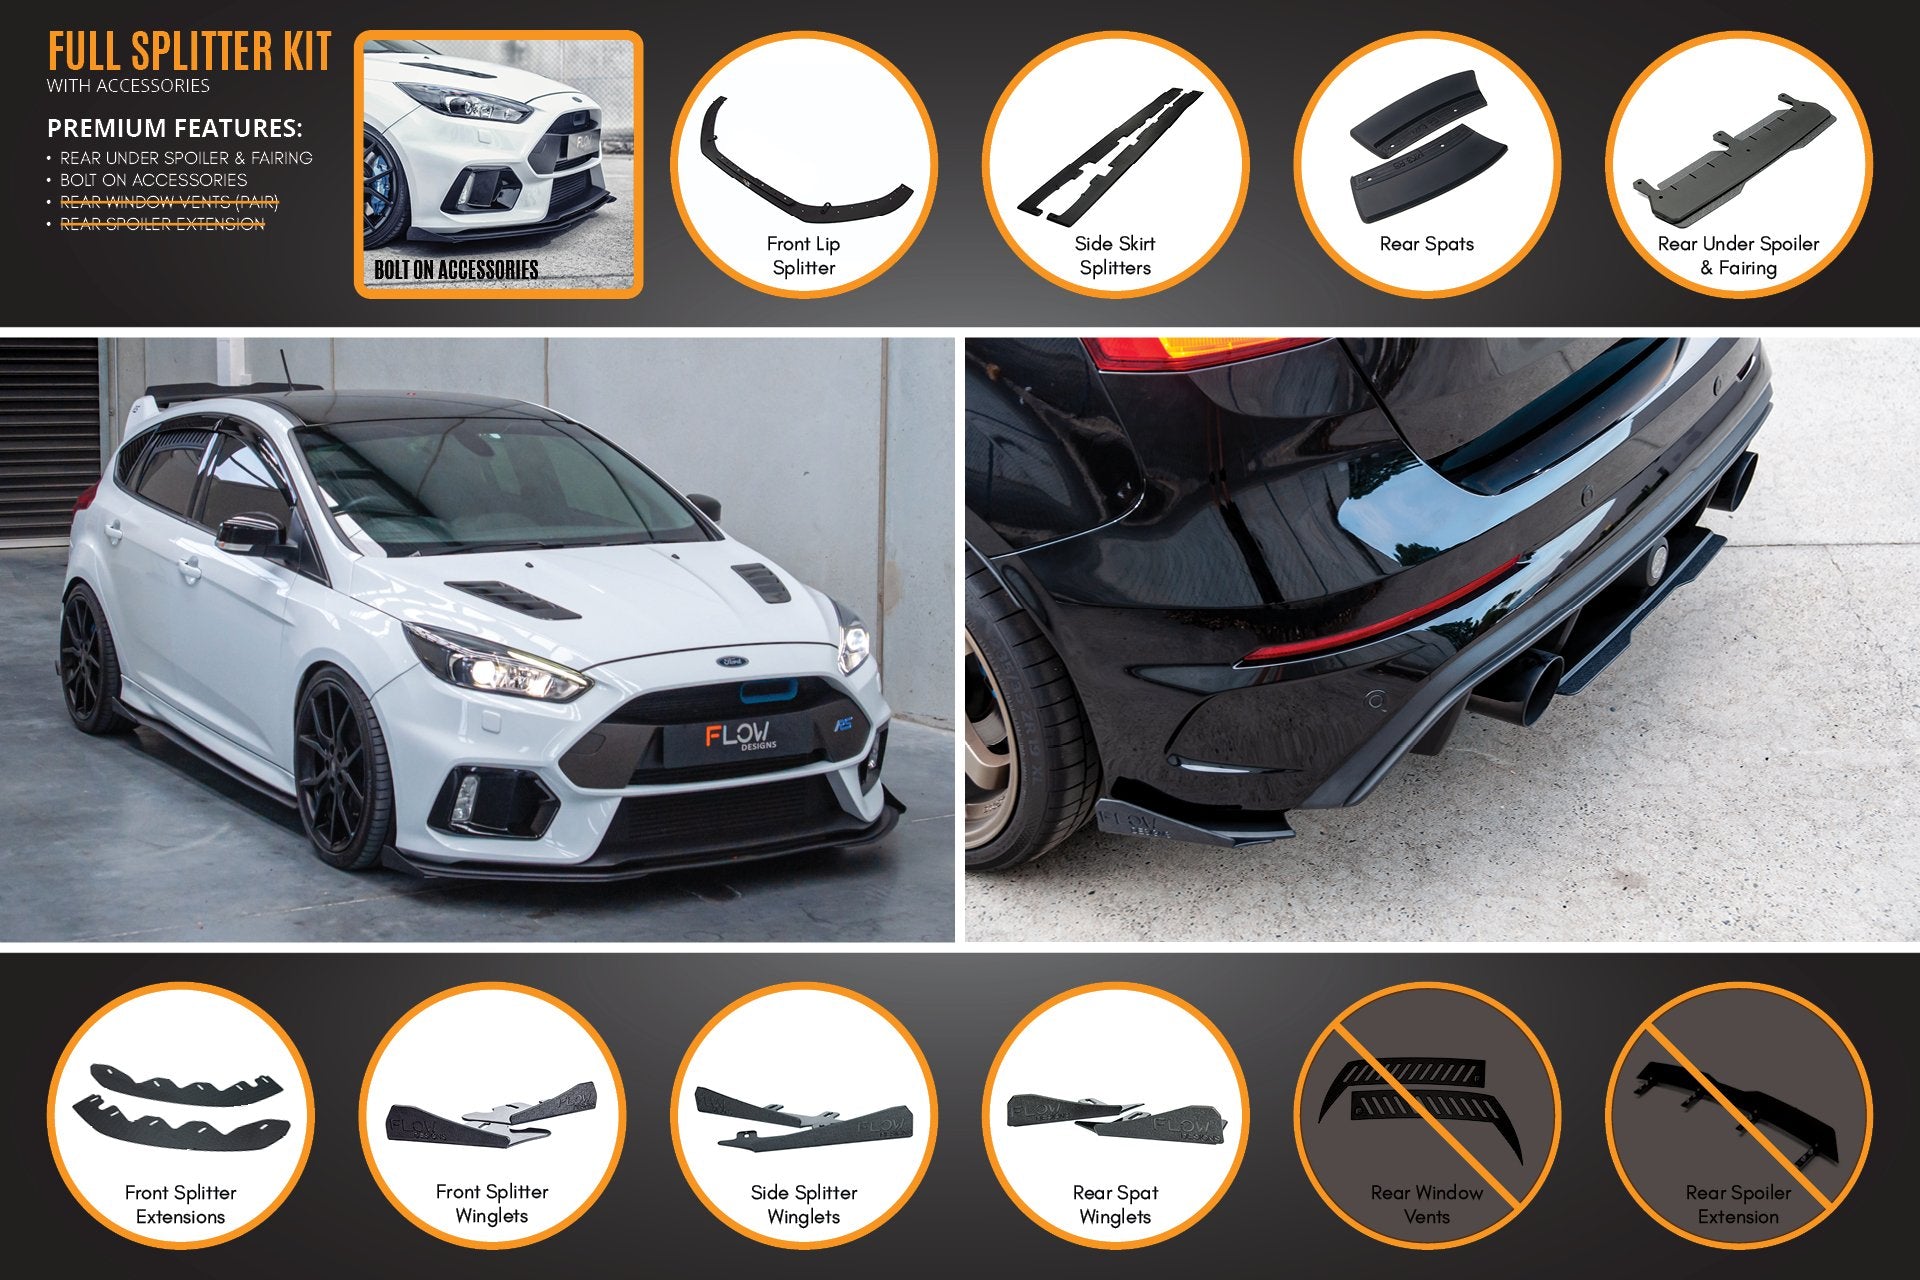 For Ford Focus MK4 ST Spoiler Hatchback Extension Rear Wing Tuning Stickers  ABS Auto Replacement Parts 2019 2020 2021